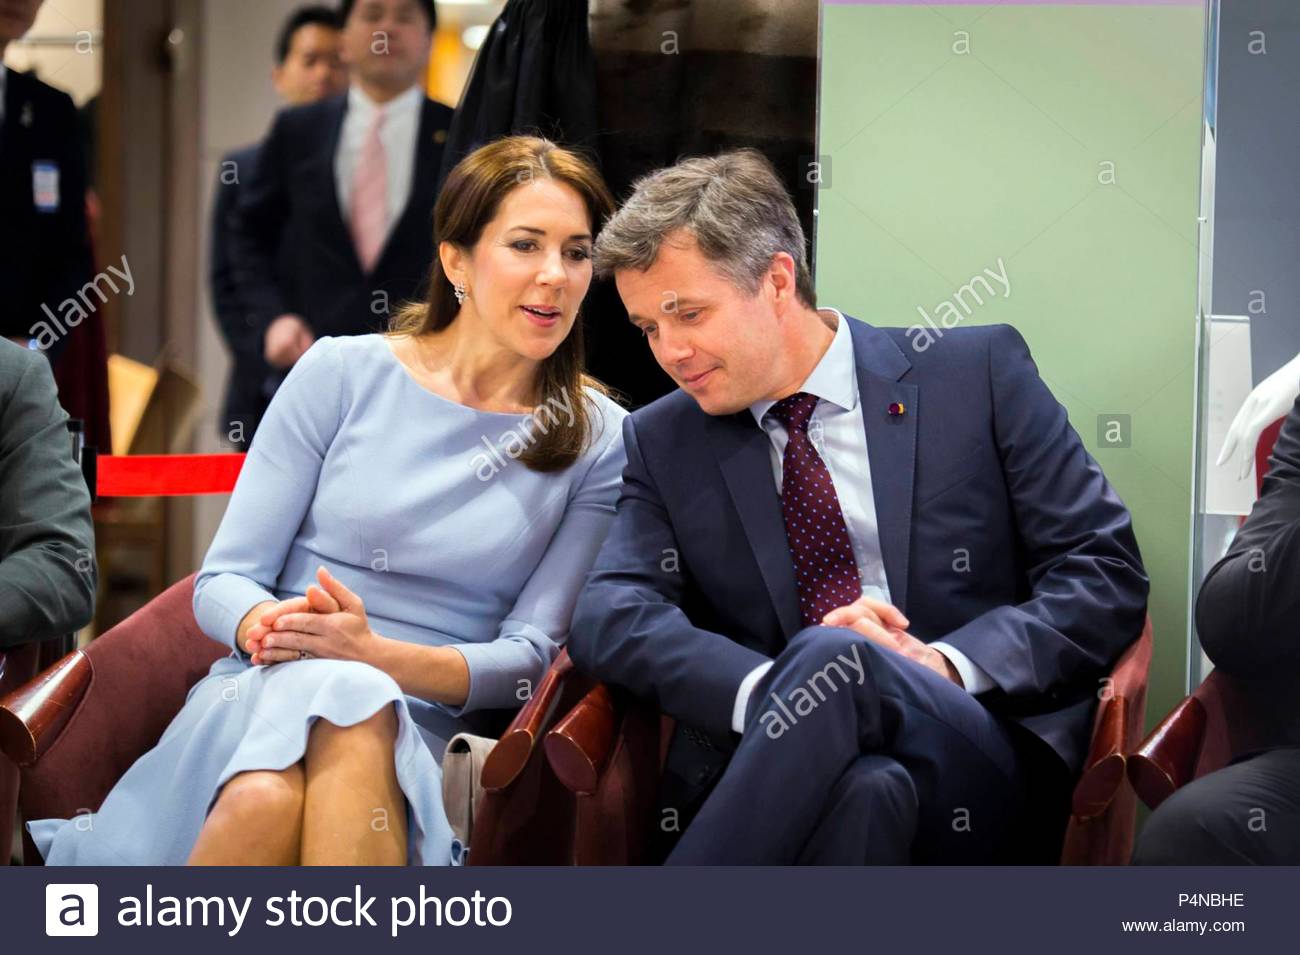 crown-prince-frederik-and-crown-princess-mary-crown-prince-frederik-and-crown-princess-mary-on-an-official-visit-to-japan-to-market-greenland-from-march-26-to-28-2015-here-visitng-the-fashion-design-school-mode-gakuen-that-works-wiath-great-greenland-and-kopenhagen-fur-and-visits-the-department-store-tokyo-honten-march-28-2015-code-07487jsu-photo-jesper-sunesenall-over-press-denmark-P4NBHE.jpg